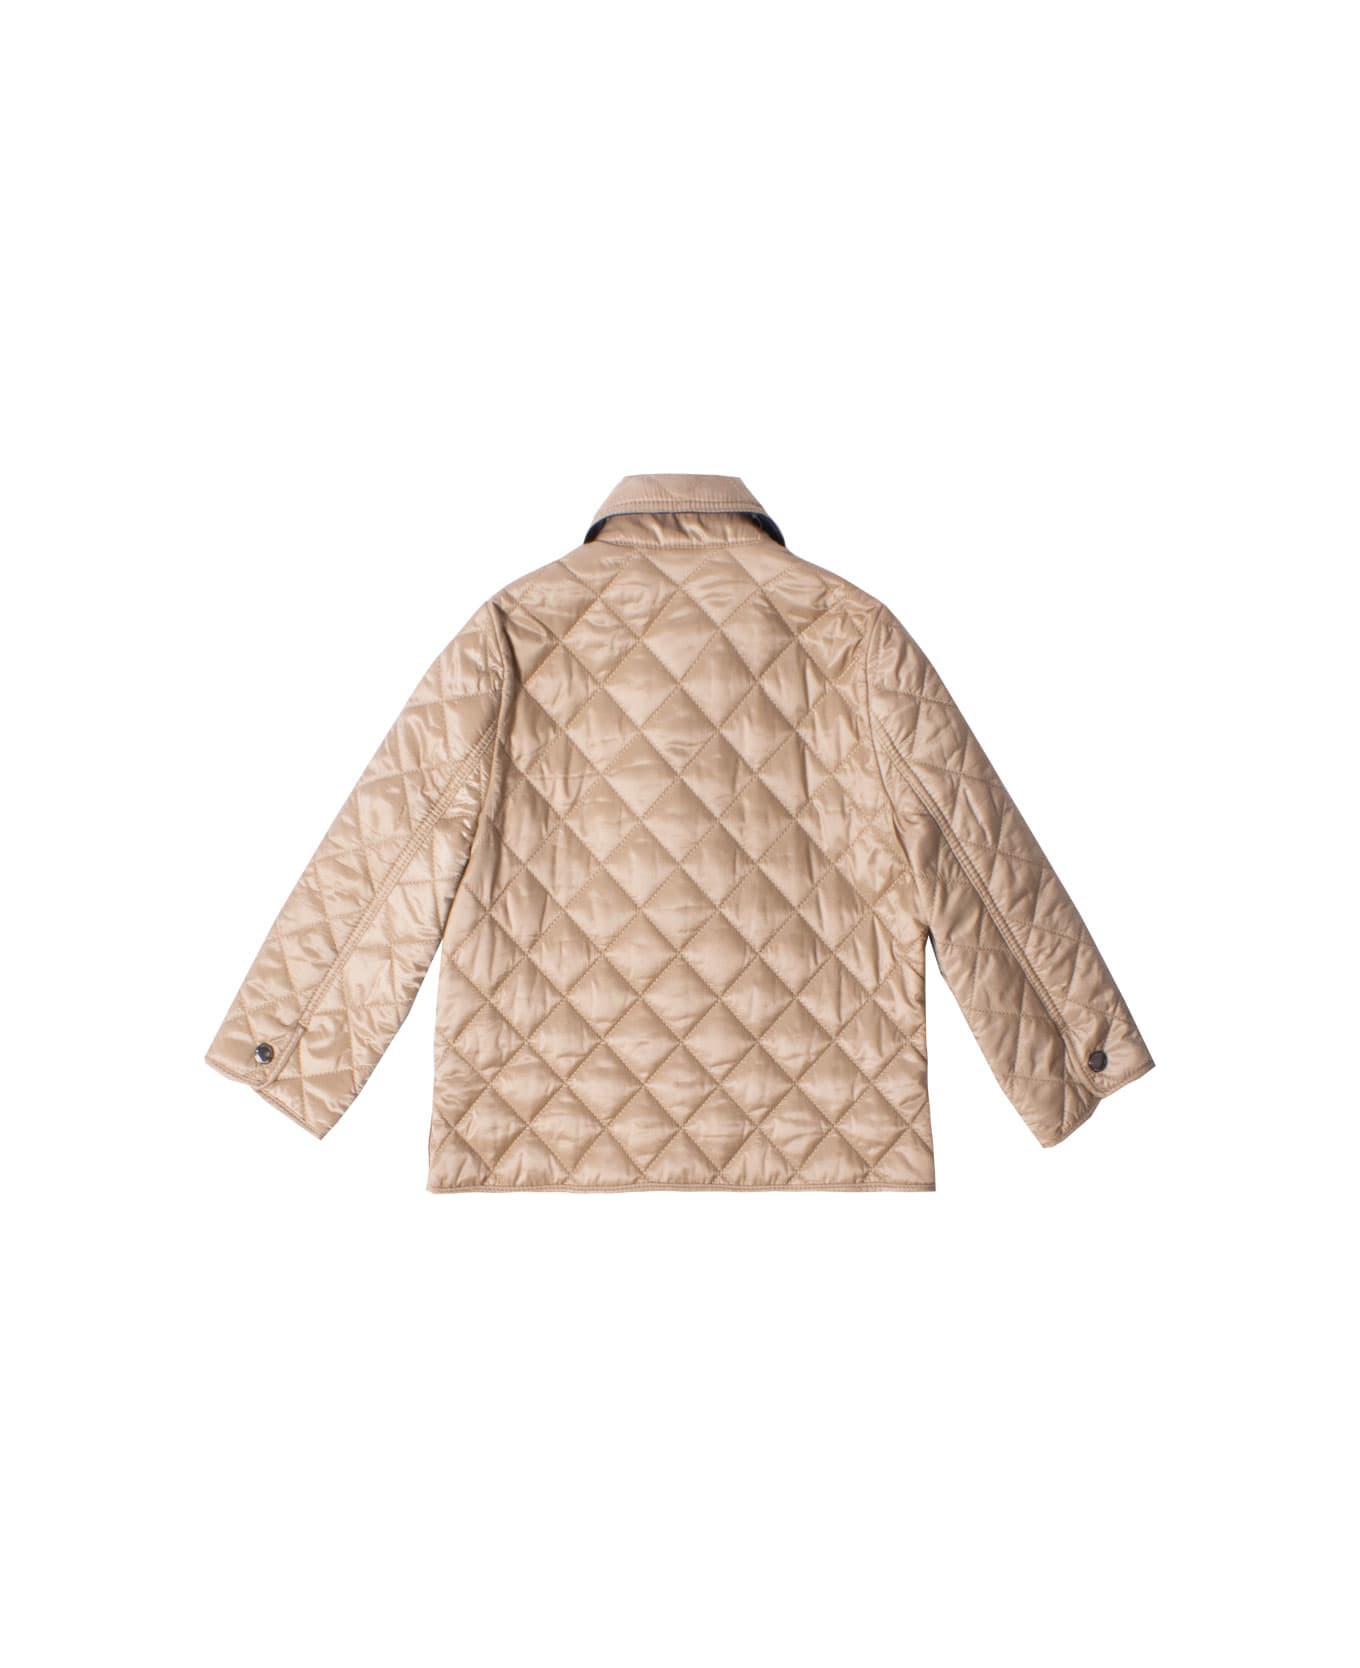 Burberry Quilted Jacket - Beige